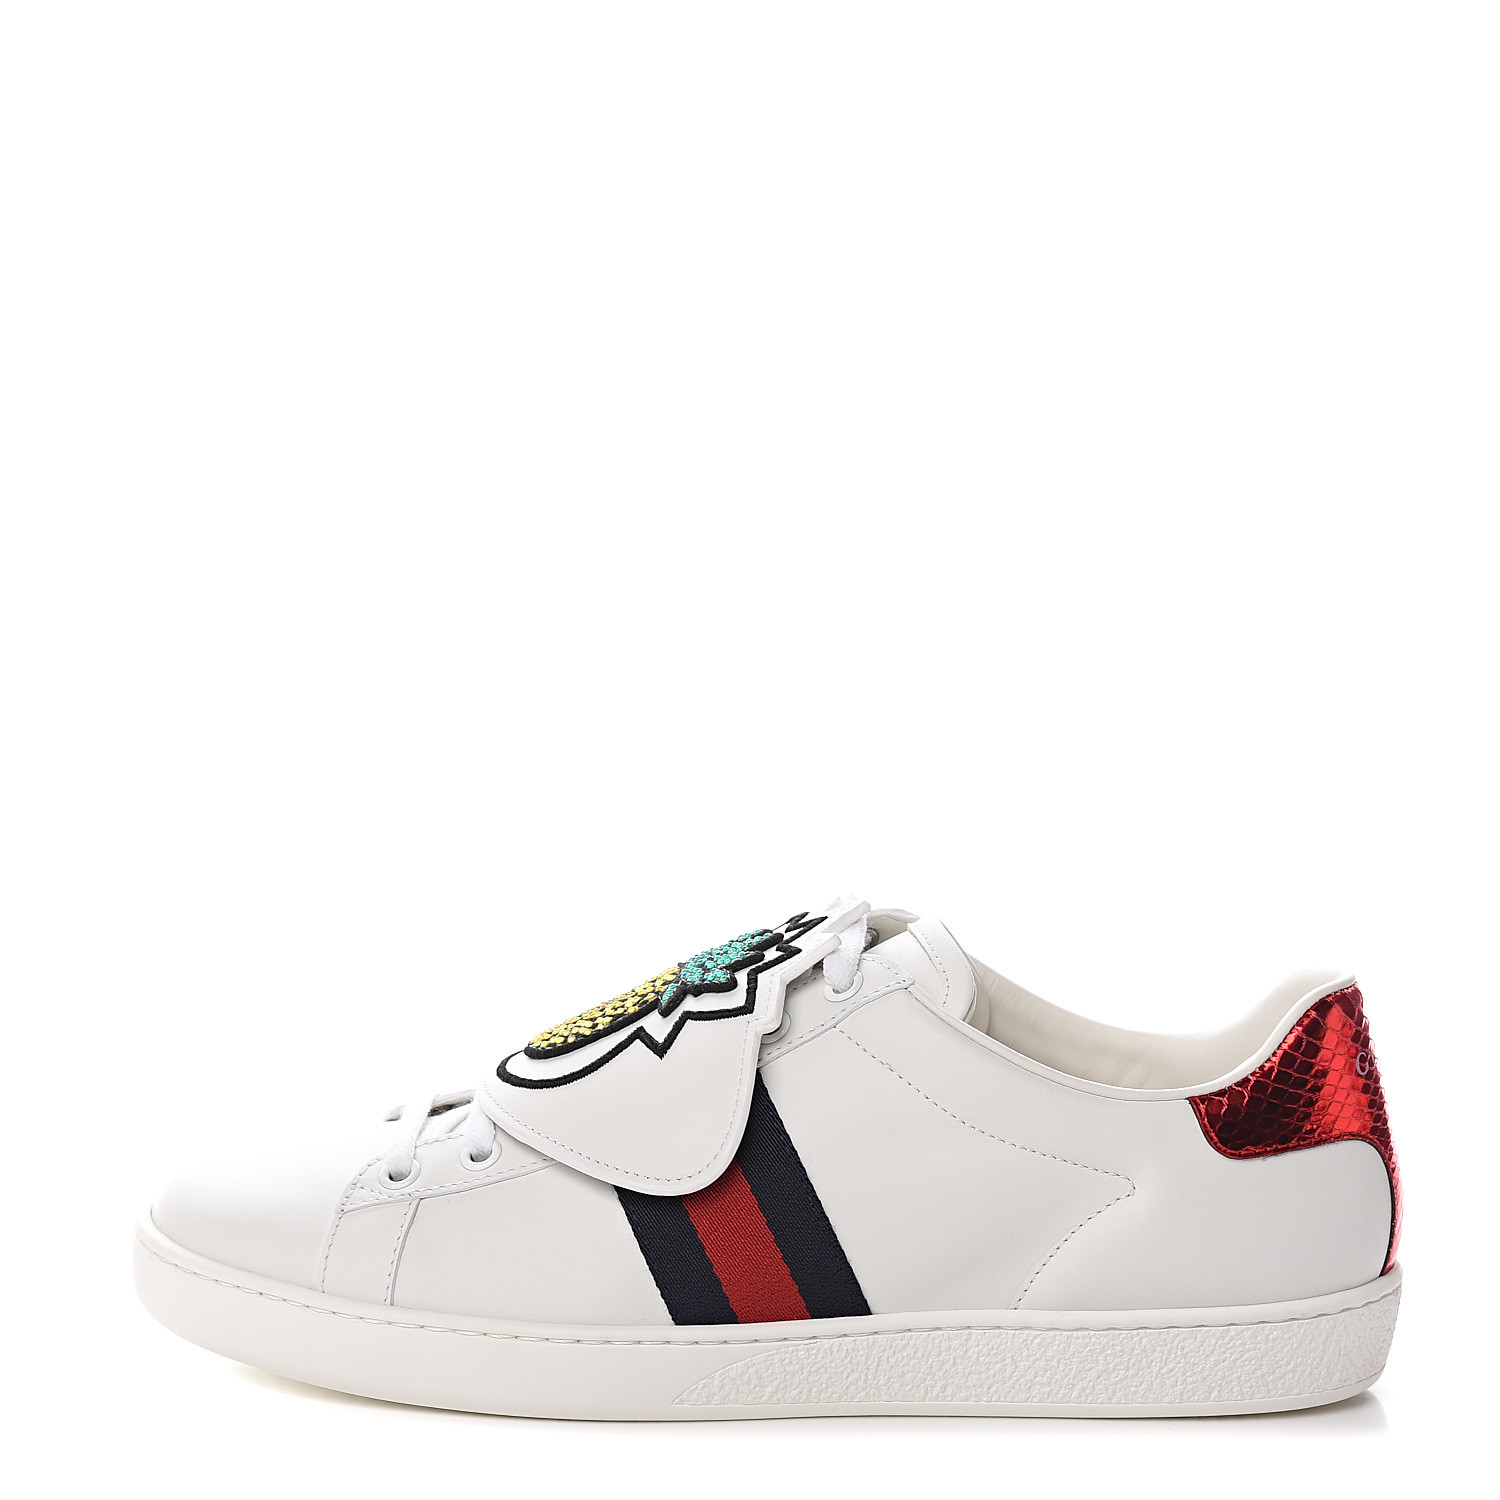 gucci sneakers pineapple